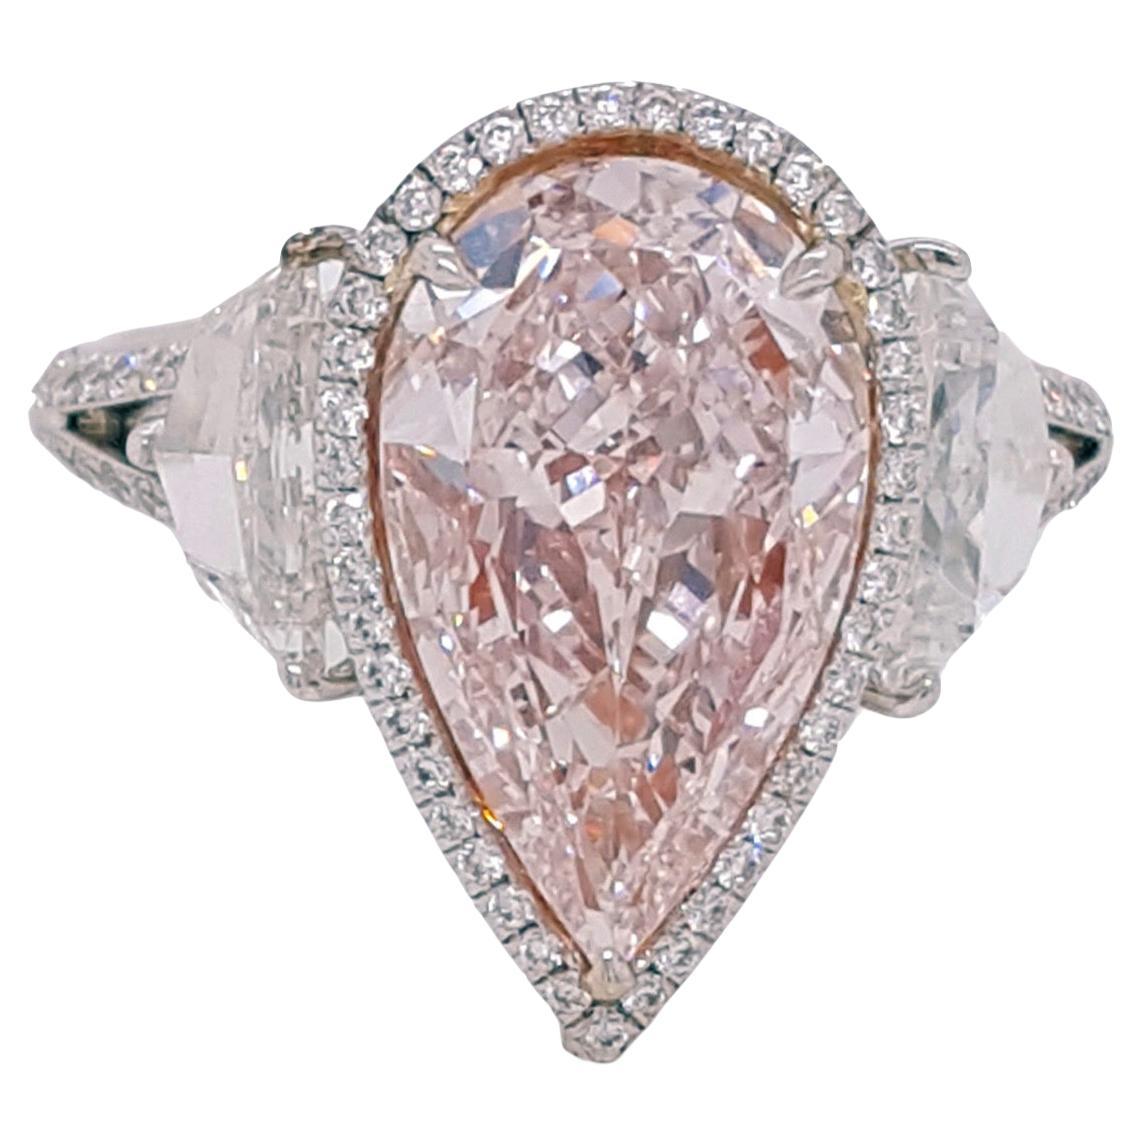 3.25 Carat Fancy Light Pink Diamond Engagement Cocktail Ring 18K Gold GIA Report For Sale